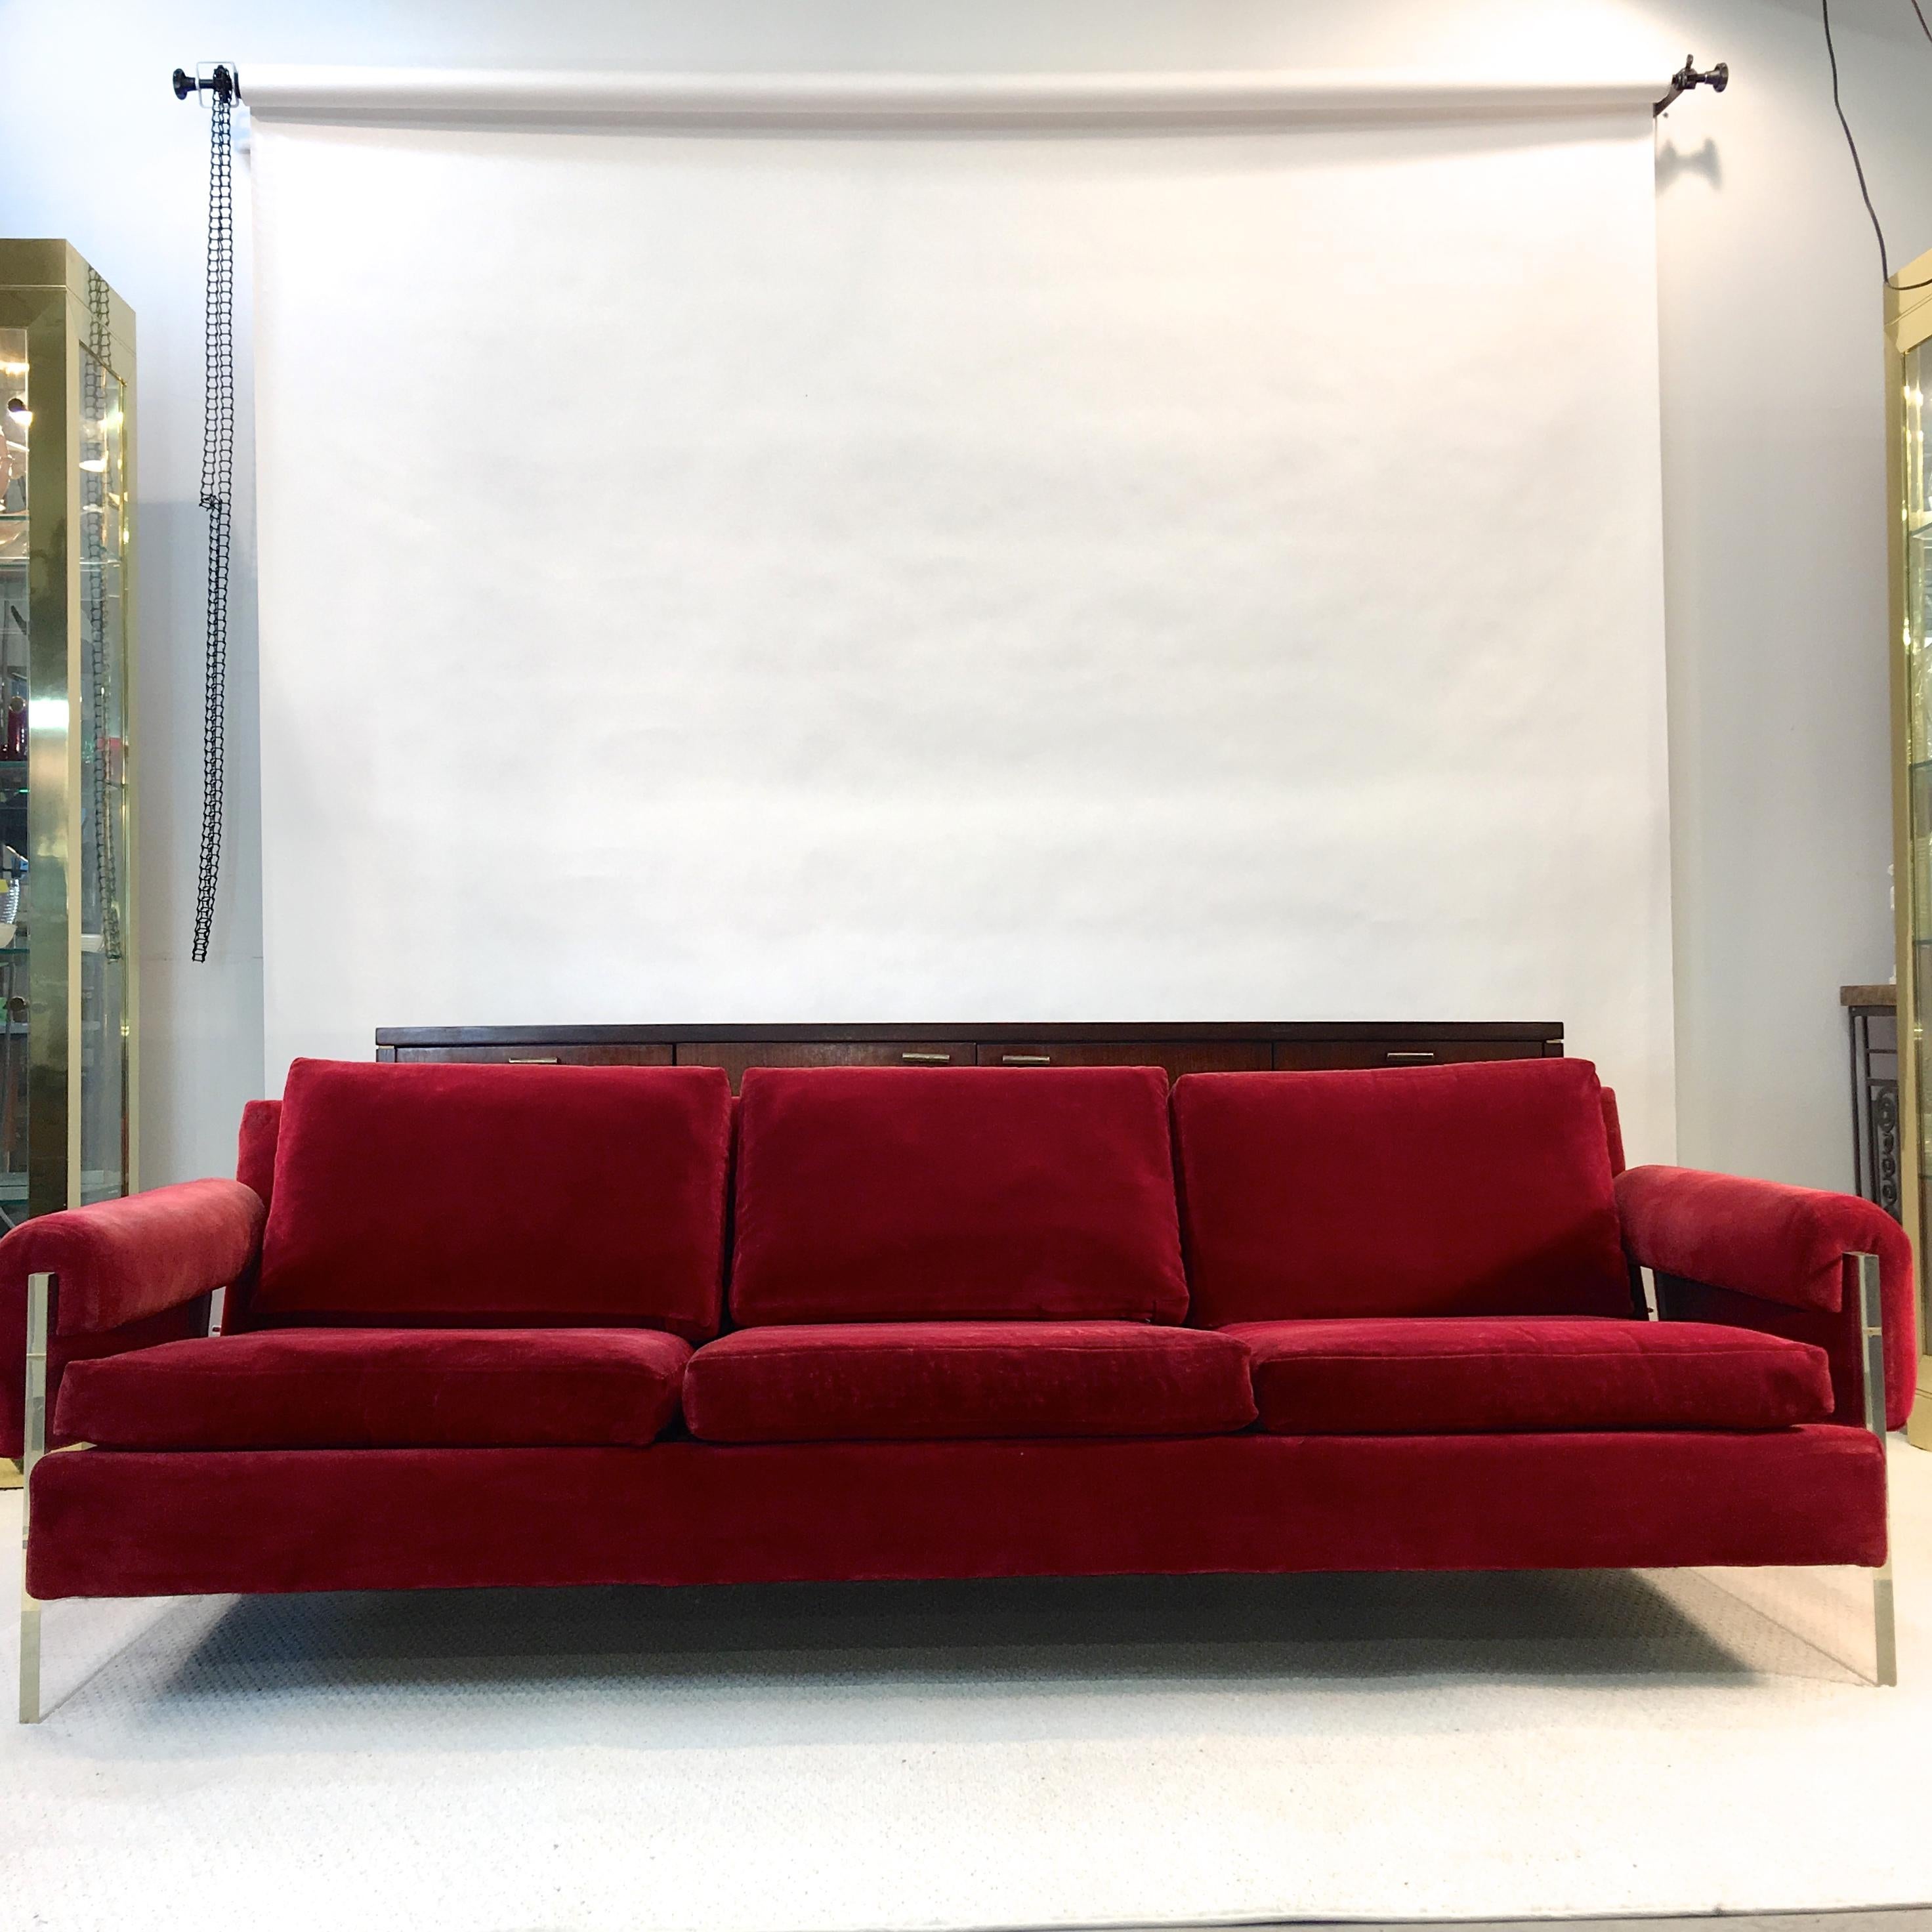 Upholstery Lucite Sided Sofa by Milo Baughman for Thayer Coggin